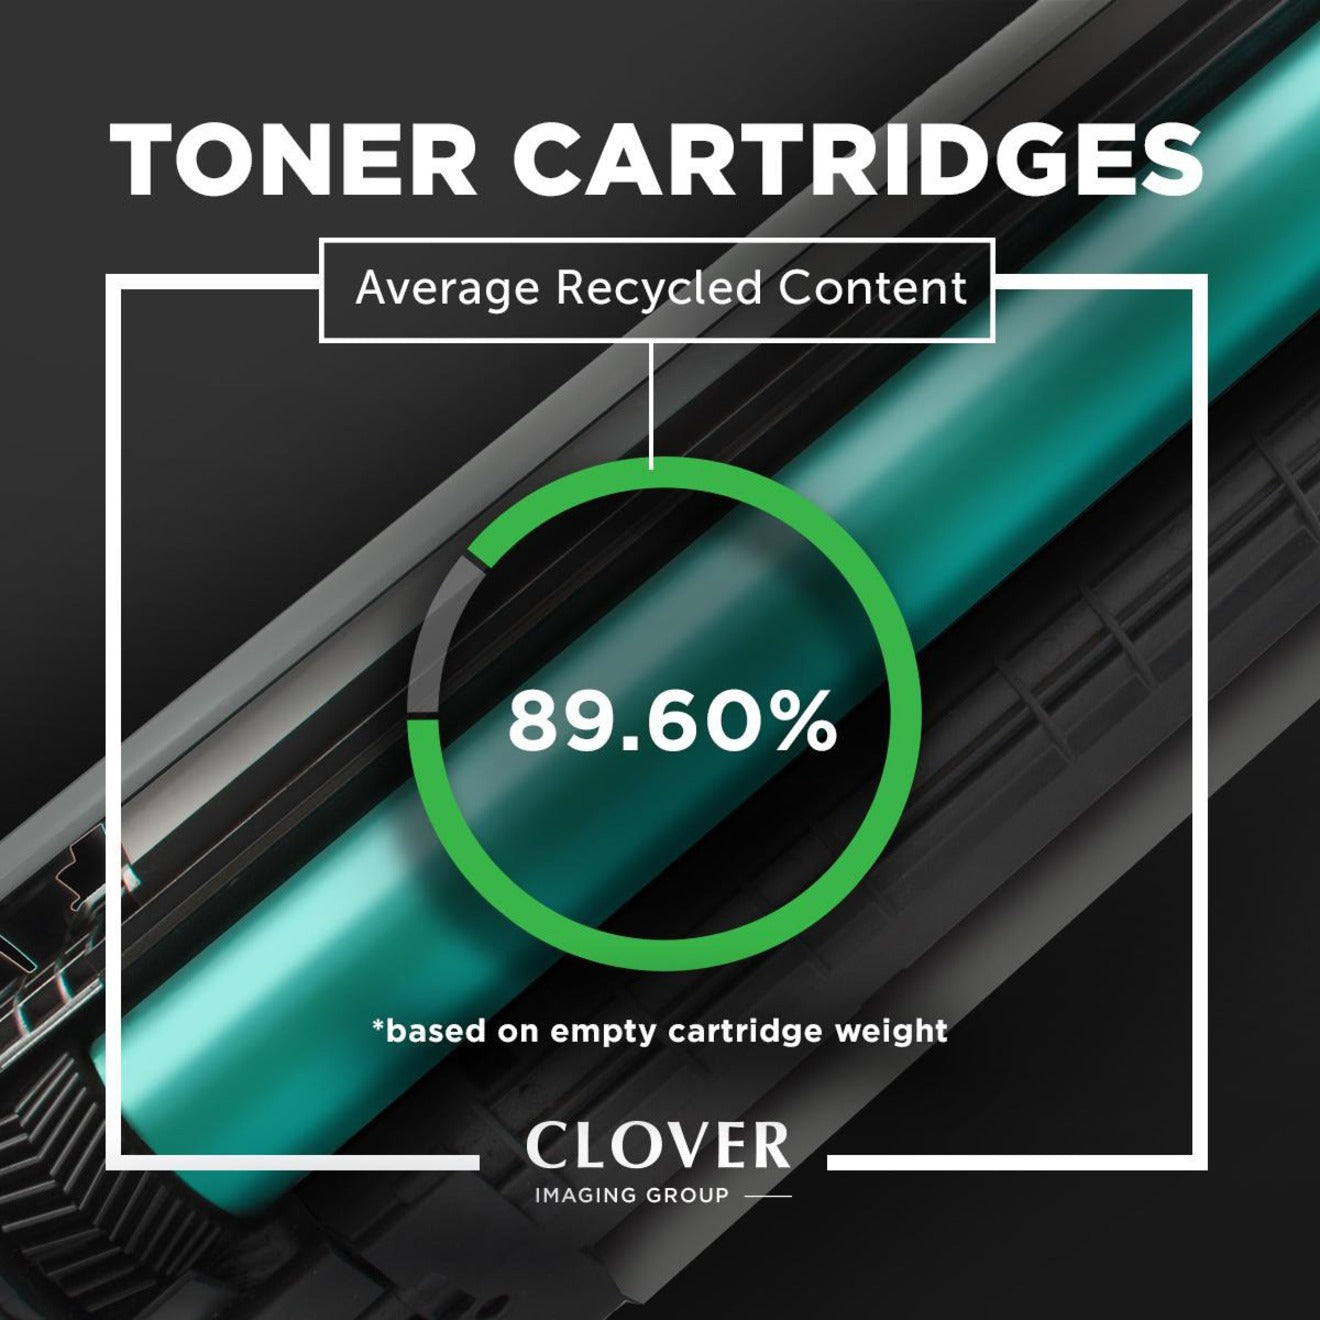 Clover Technologies Remanufactured Extended Yield Laser Toner Cartridge - Alternative for HP Troy Atos 53A 53X (Q7553A Q7553X Q7553X(J) 836014 836014XL 02-81212-001 02-81213-001 2-81212-001 2-81213-001) - Black Pack